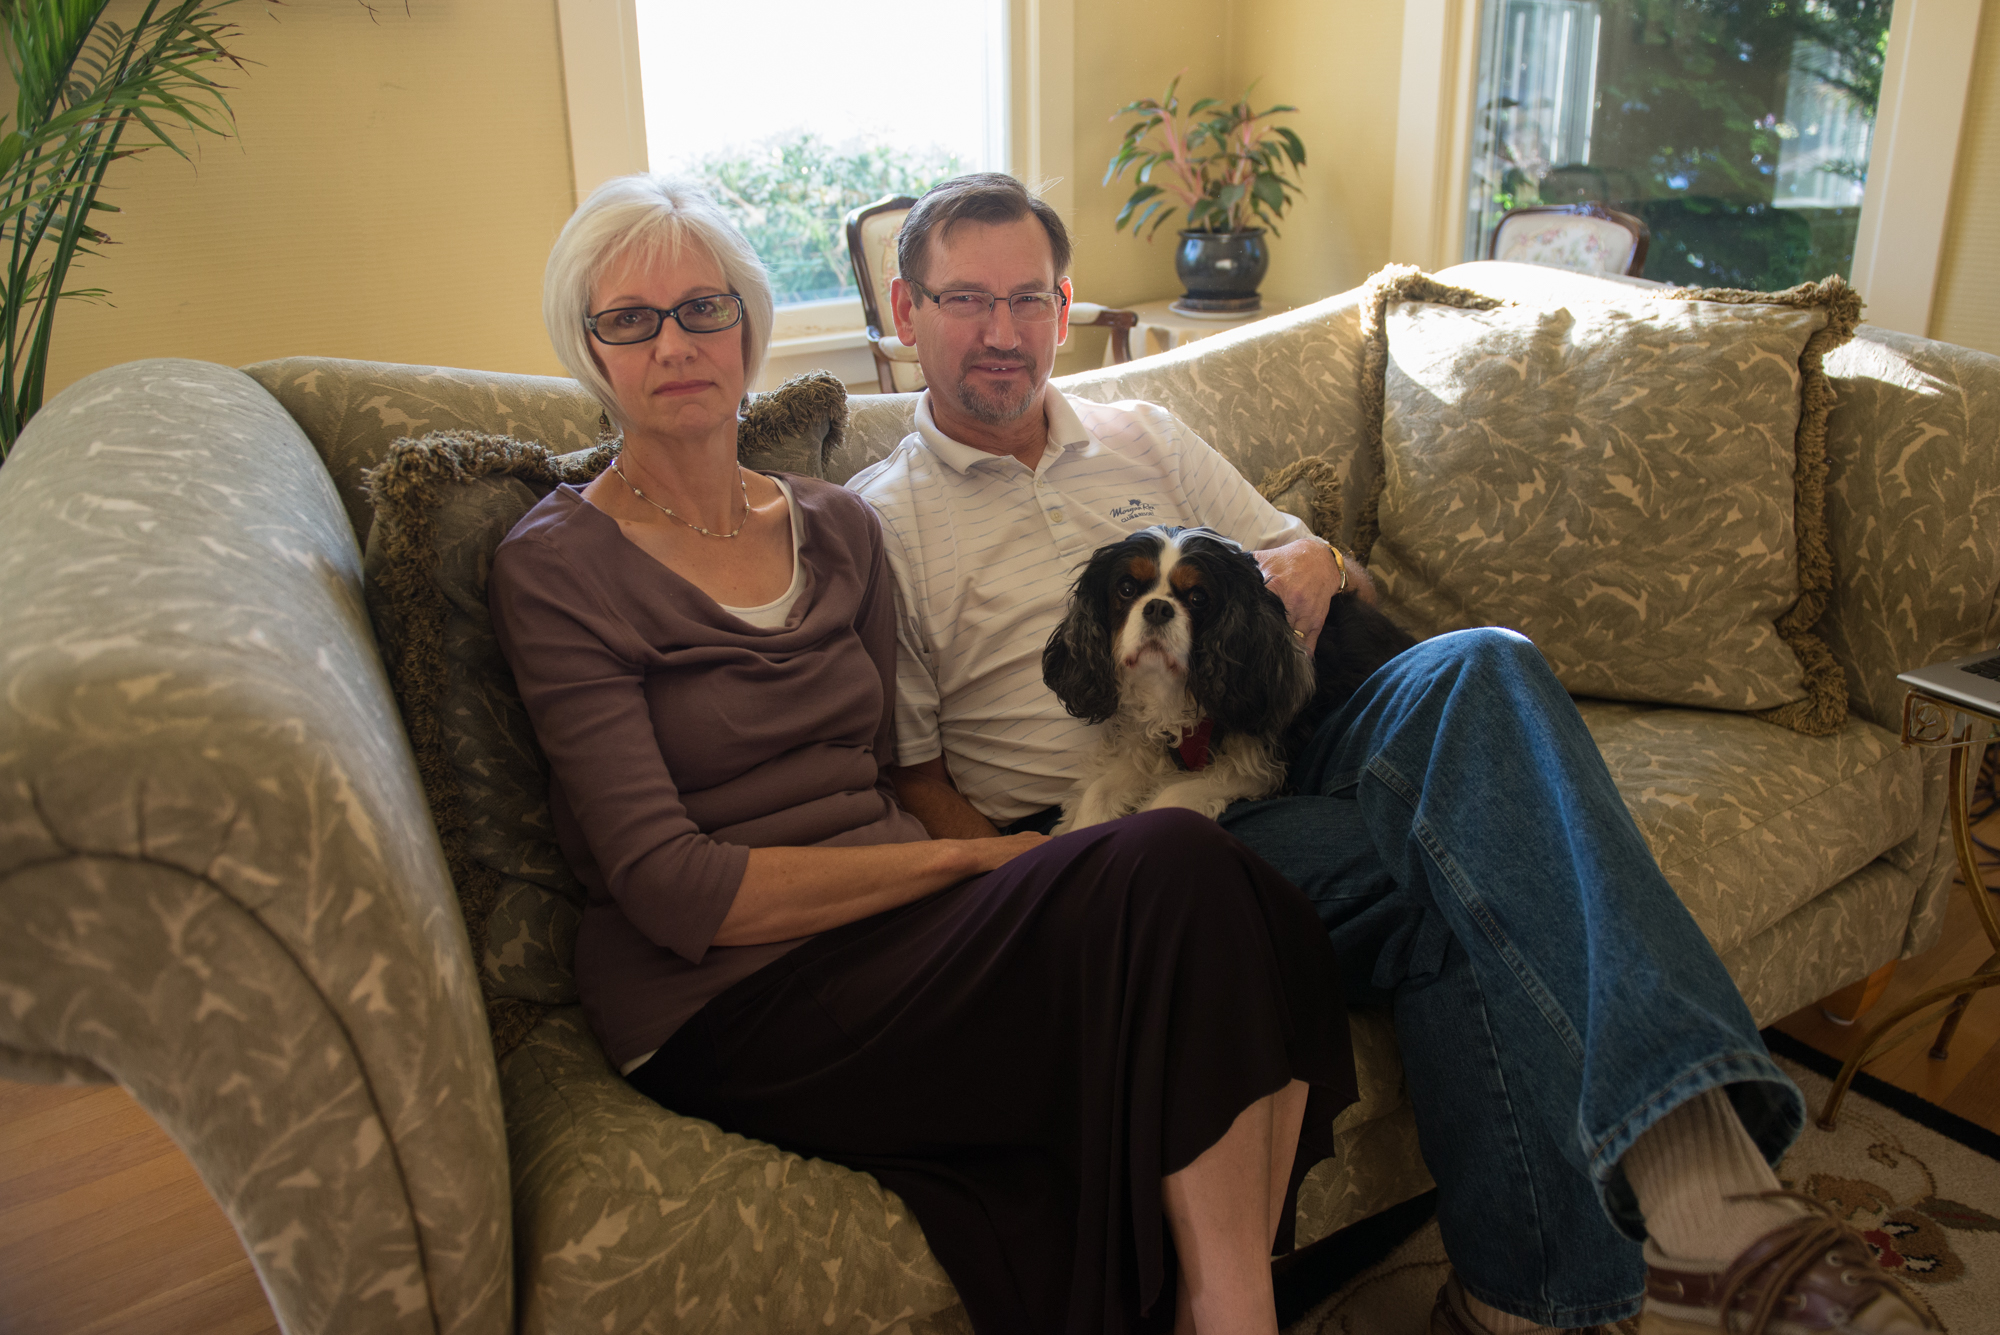 Rob Smith, shown here at home with his wife, Merle, is bringing former parishioners together. Photo by Morgen Schuler